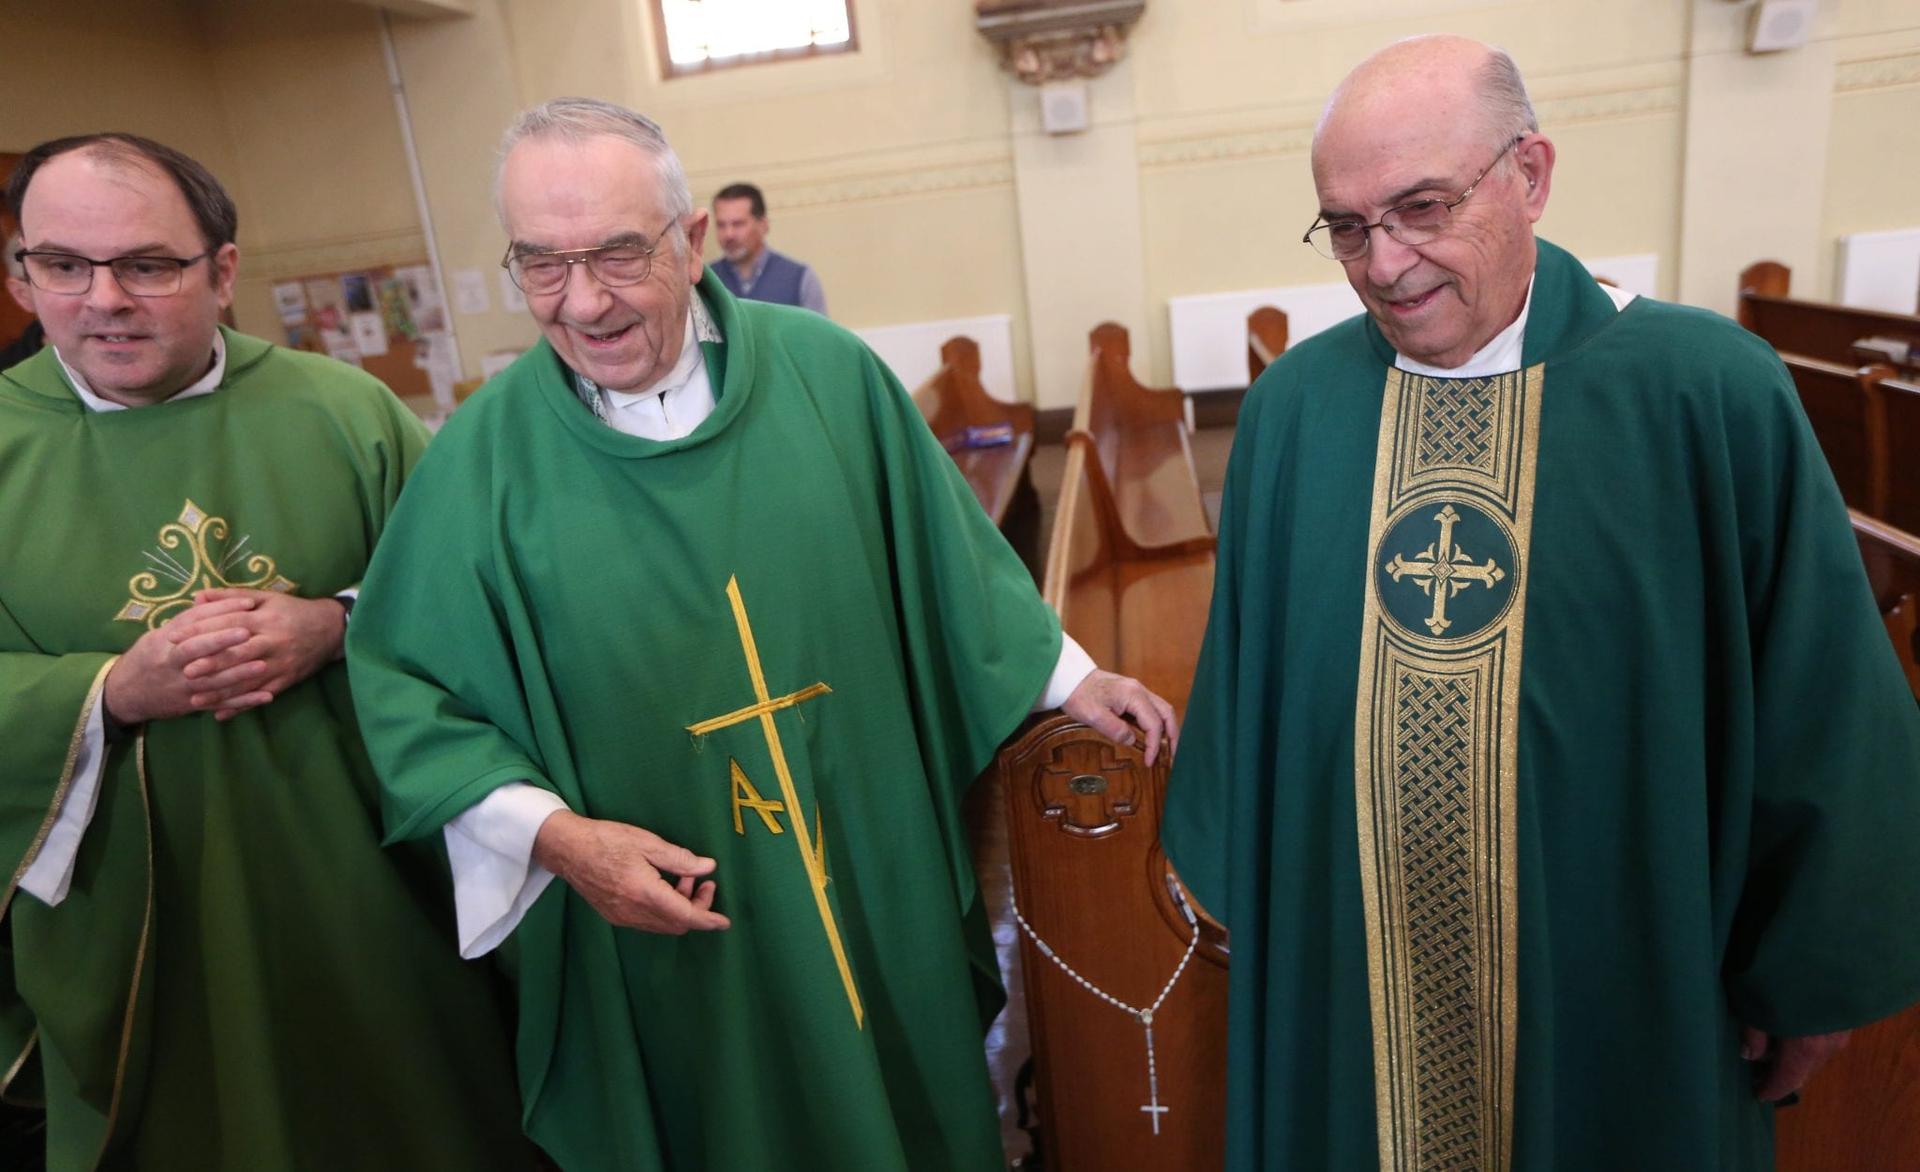 Brother priests mark 60th year of ordination with Mass — and a snowstorm